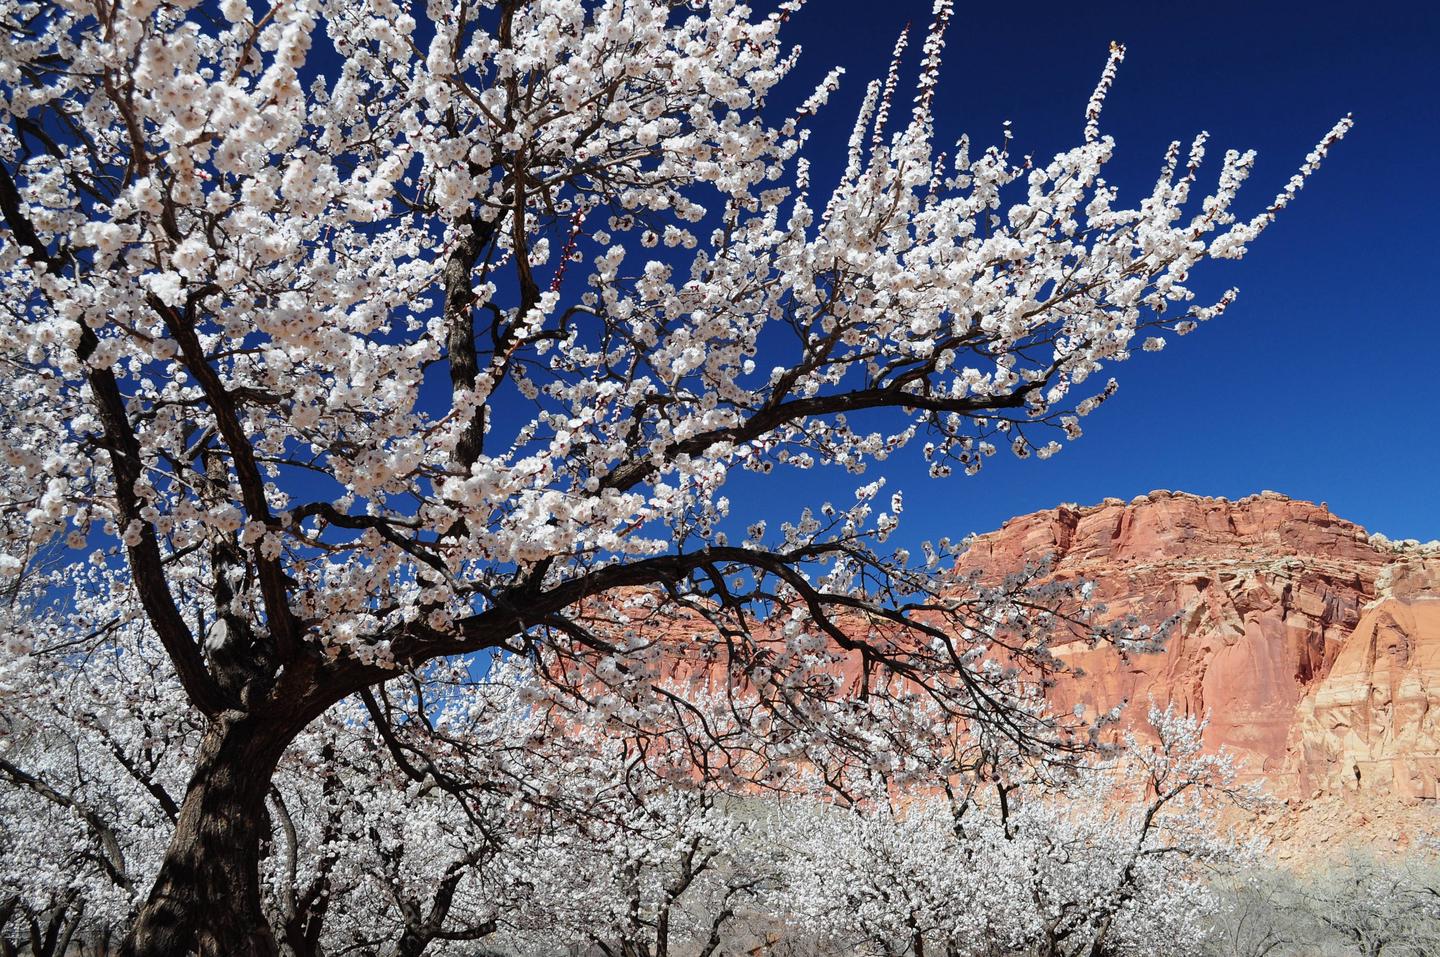 A singular tree with white flowers on it is the focus, many similar trees are behind it. In the background is a red rock cliff. The sky is a rich blue.Peach Tree in bloom near Fruita Campground